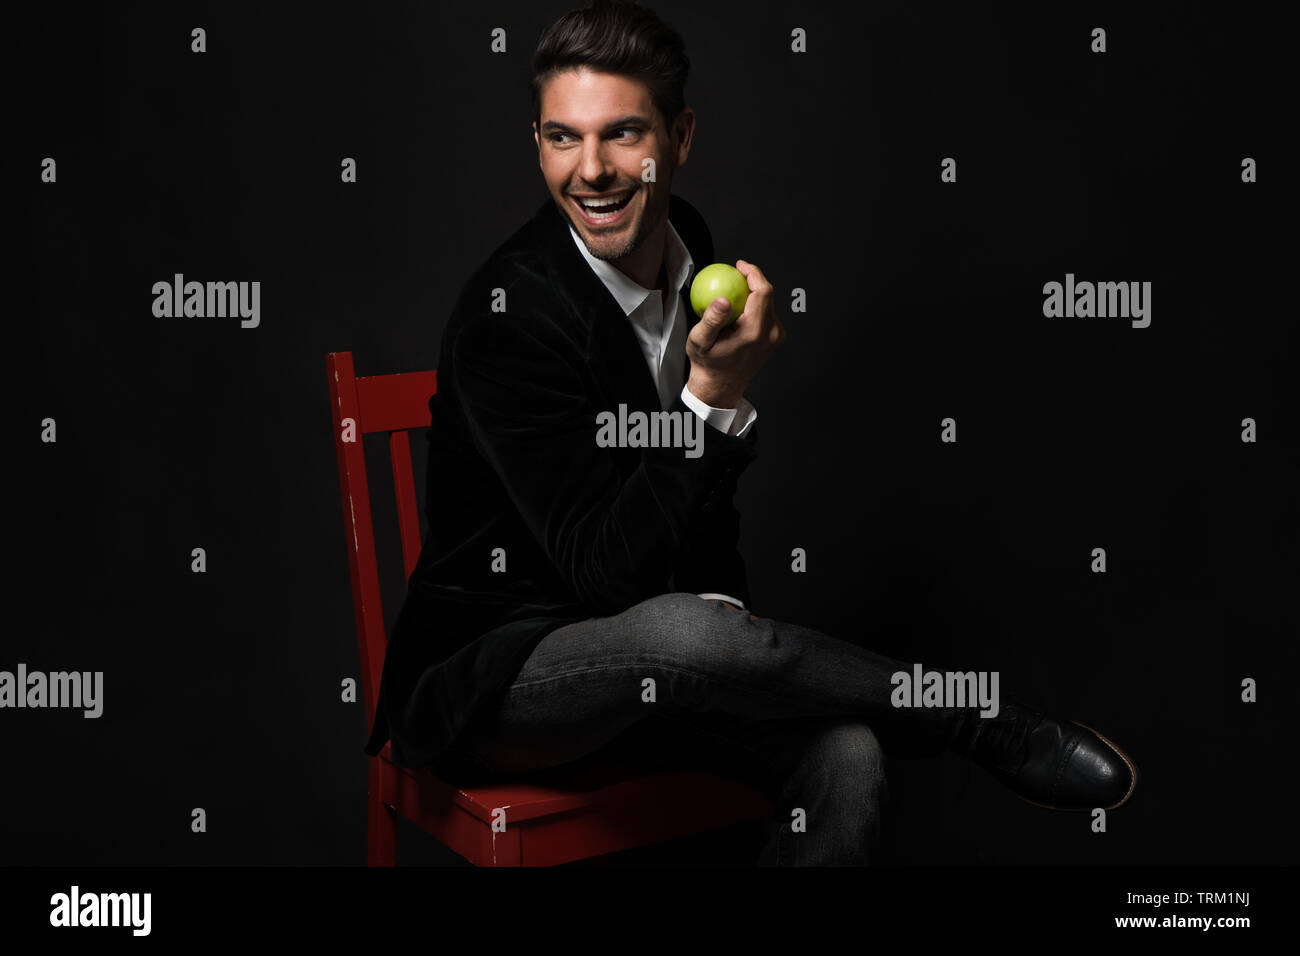 A good looking white male model sits with his legs crossed on a red chair, holding a green apple. He looks away smiling in a playful mood. Stock Photo